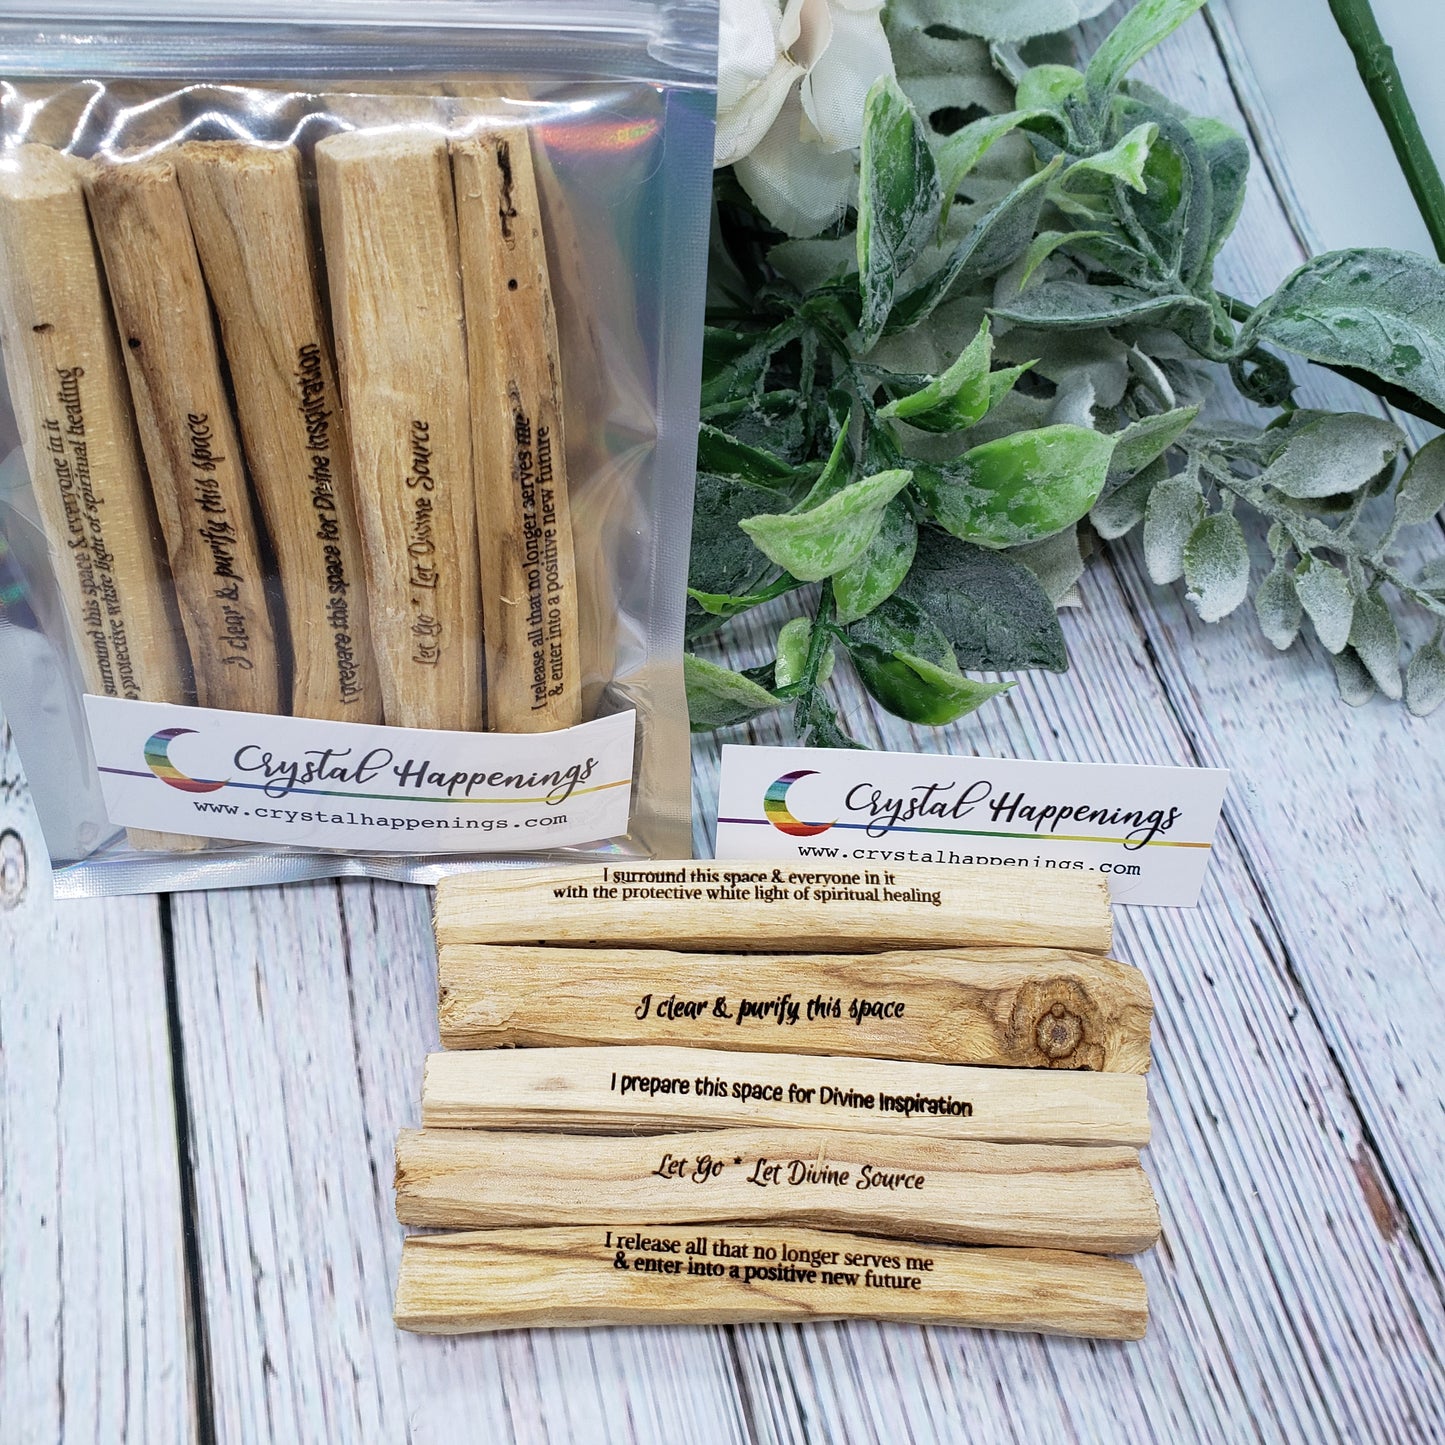 Wide View of our Palo Mantra Palo Santo Gift Set in and out of packaging